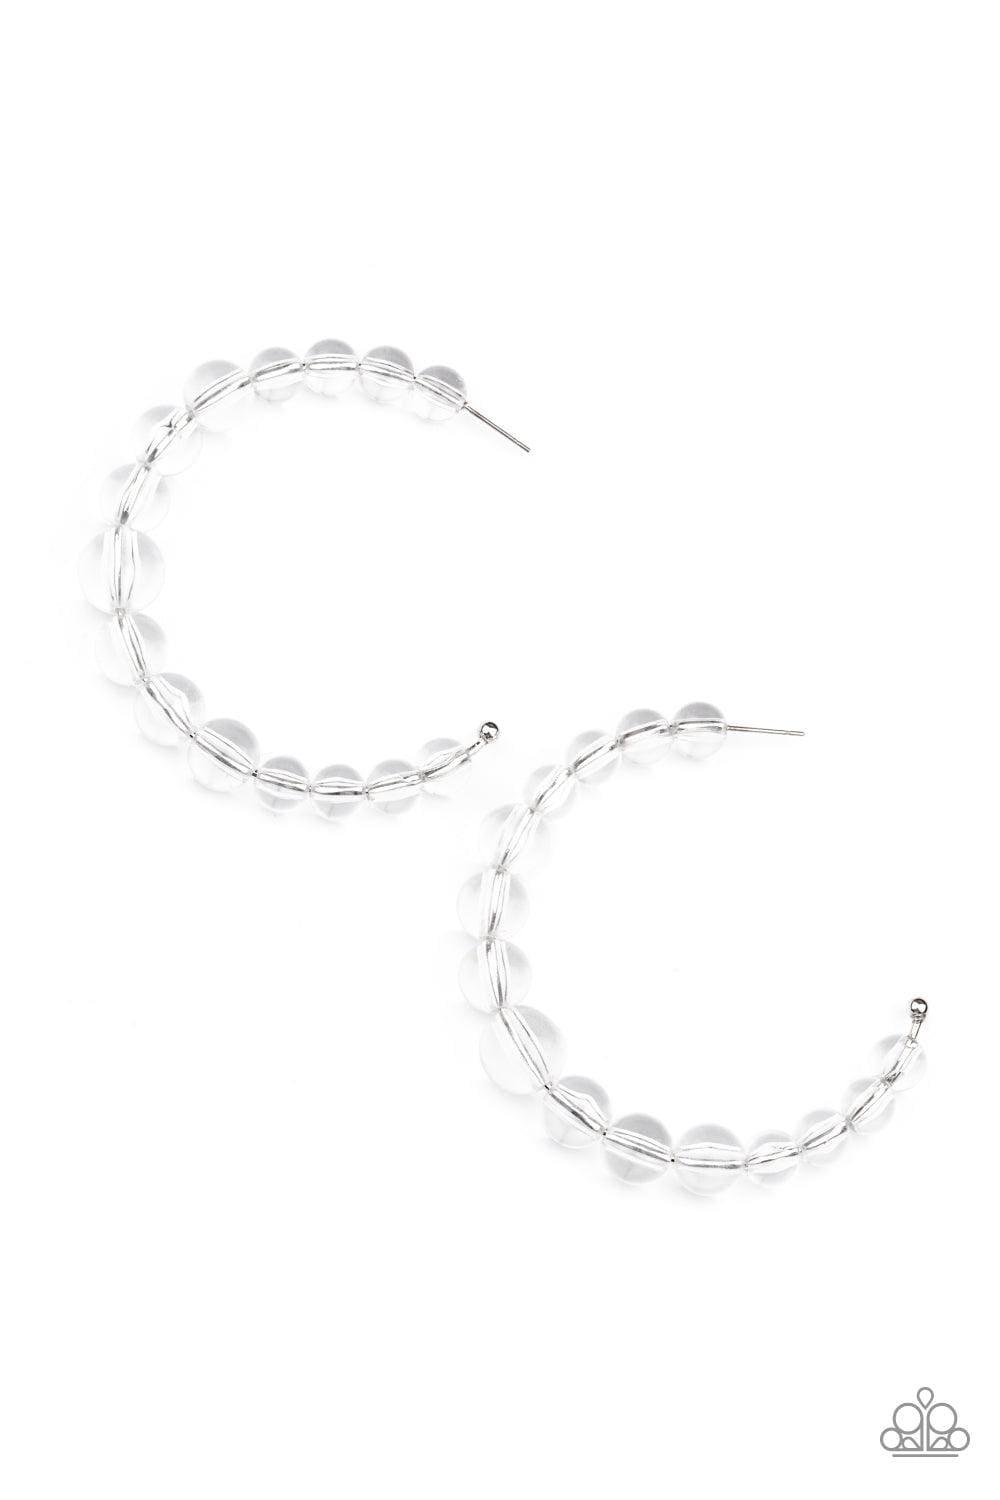 Paparazzi Accessories - In The Clear - White Hoop Earrings - Bling by JessieK